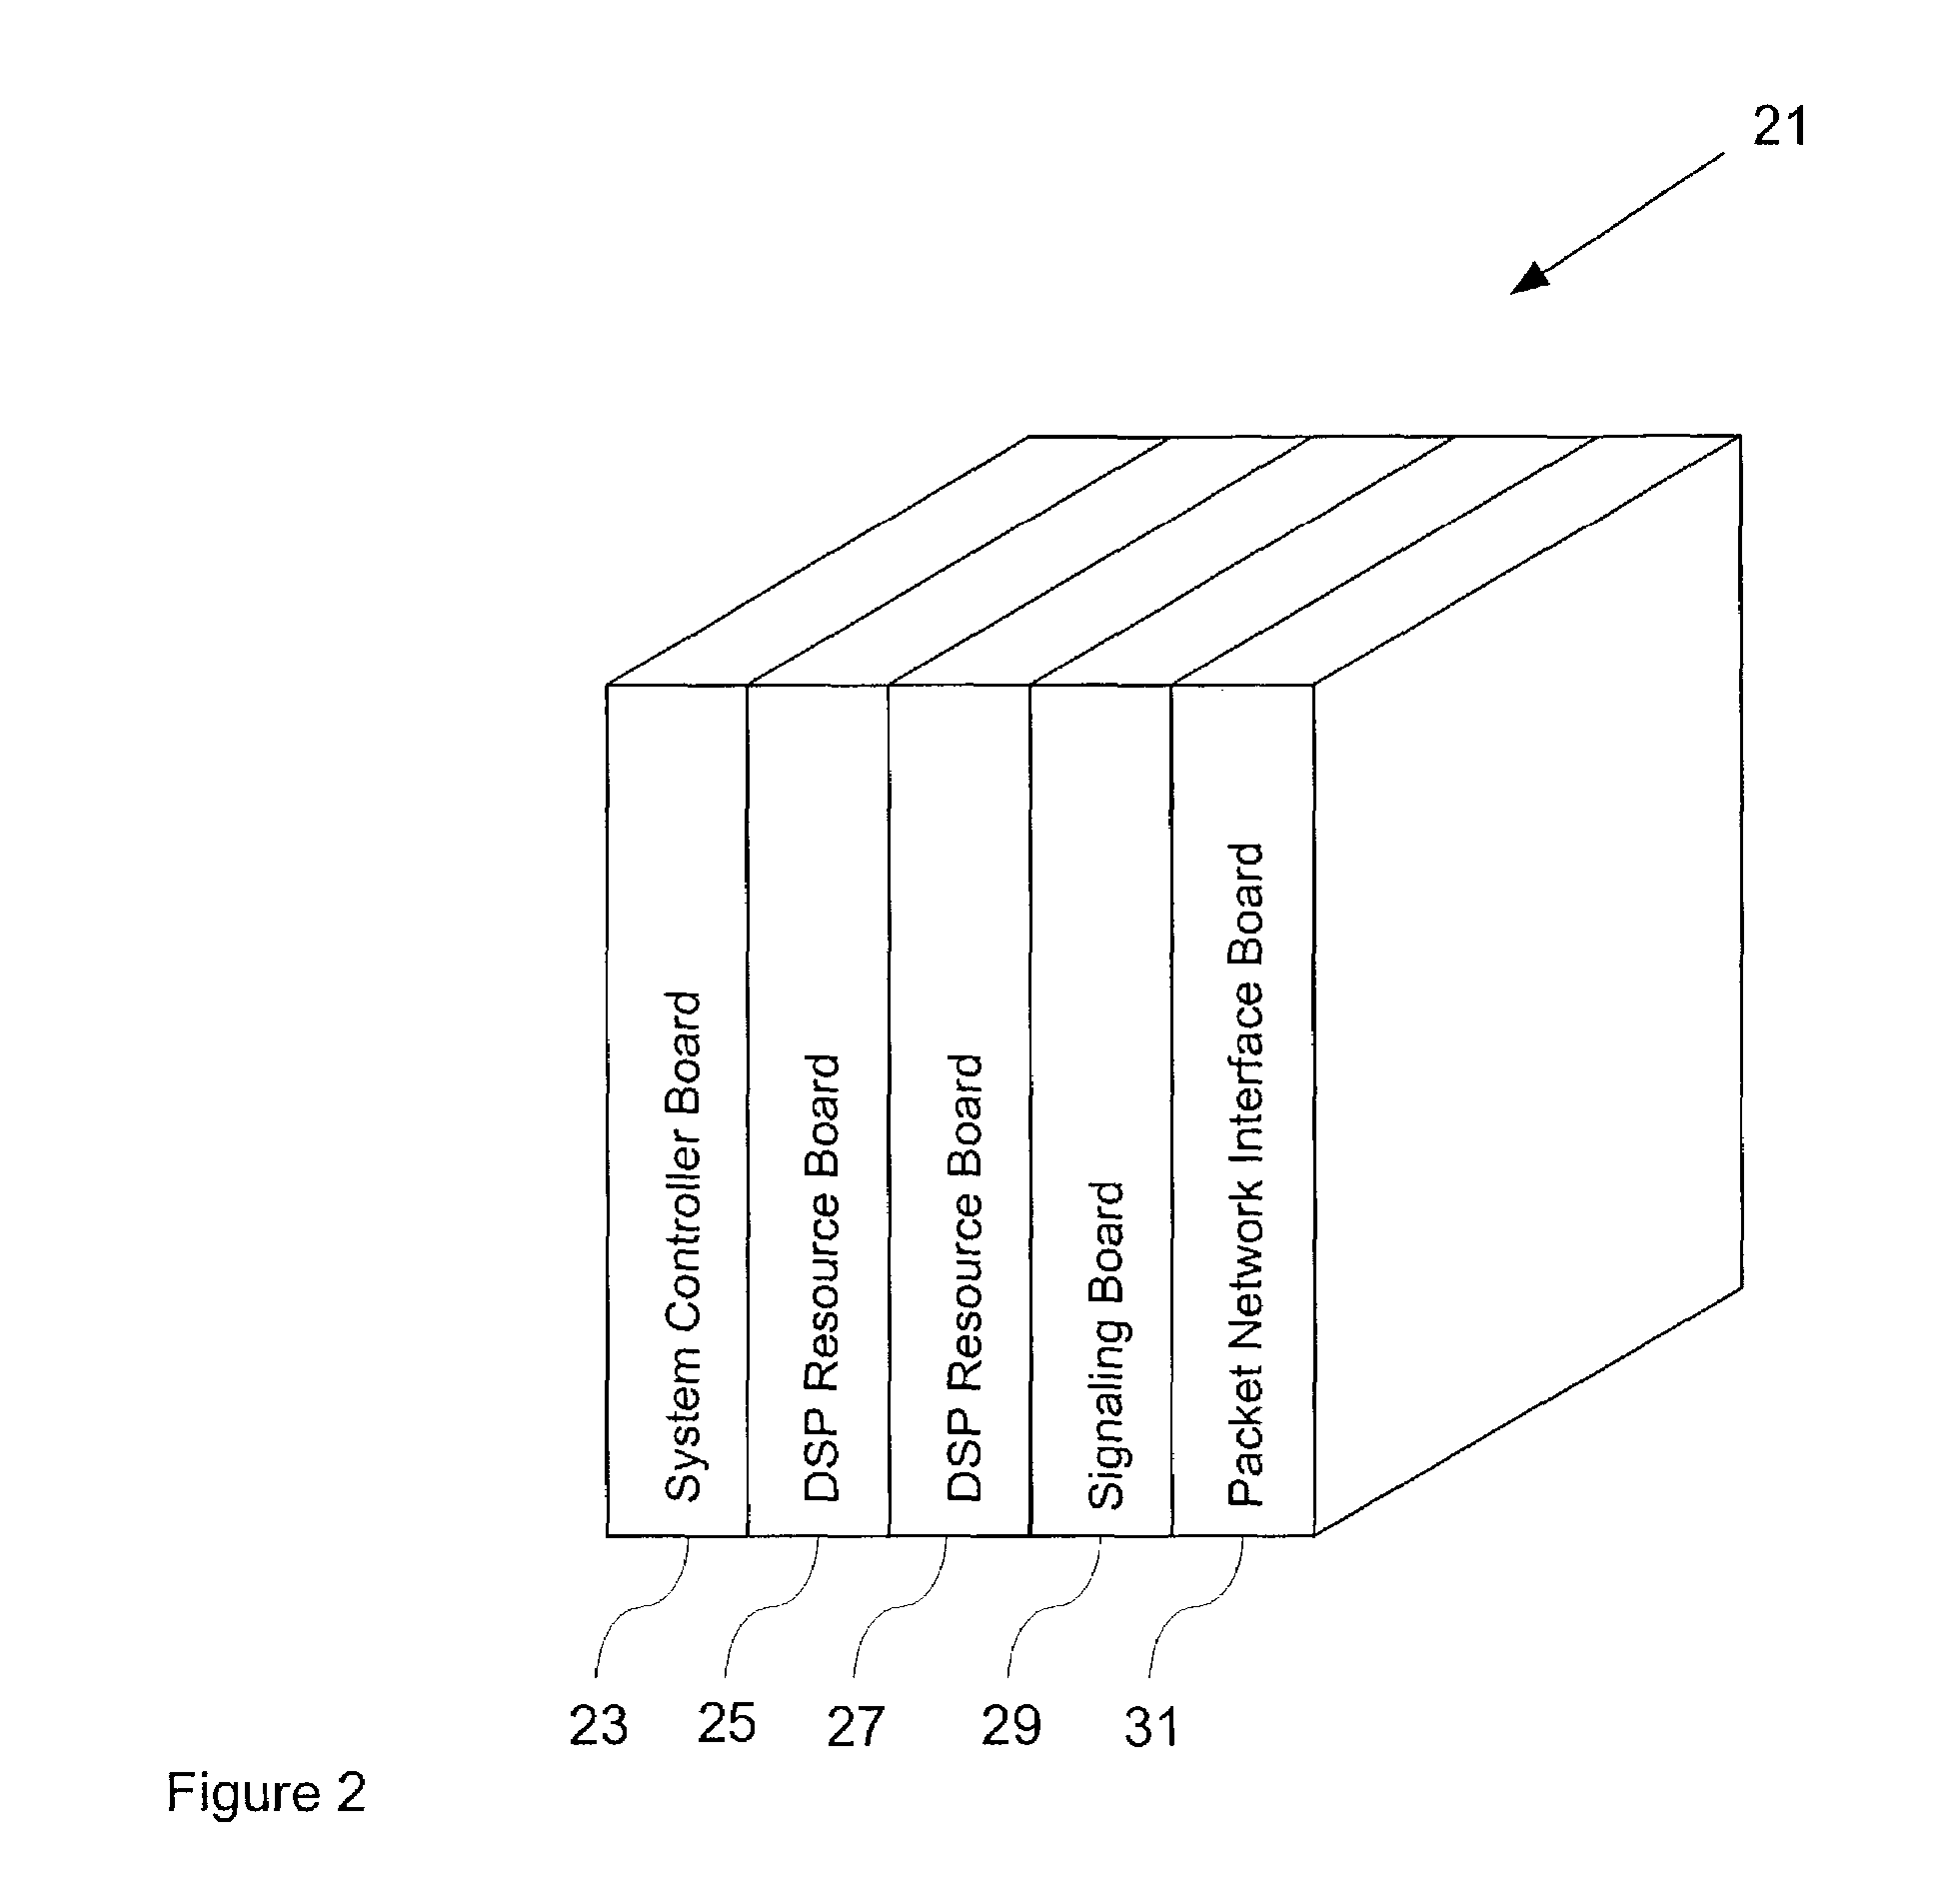 System, software and method for implementing an integrated, device independent, packet telephony framework software solution